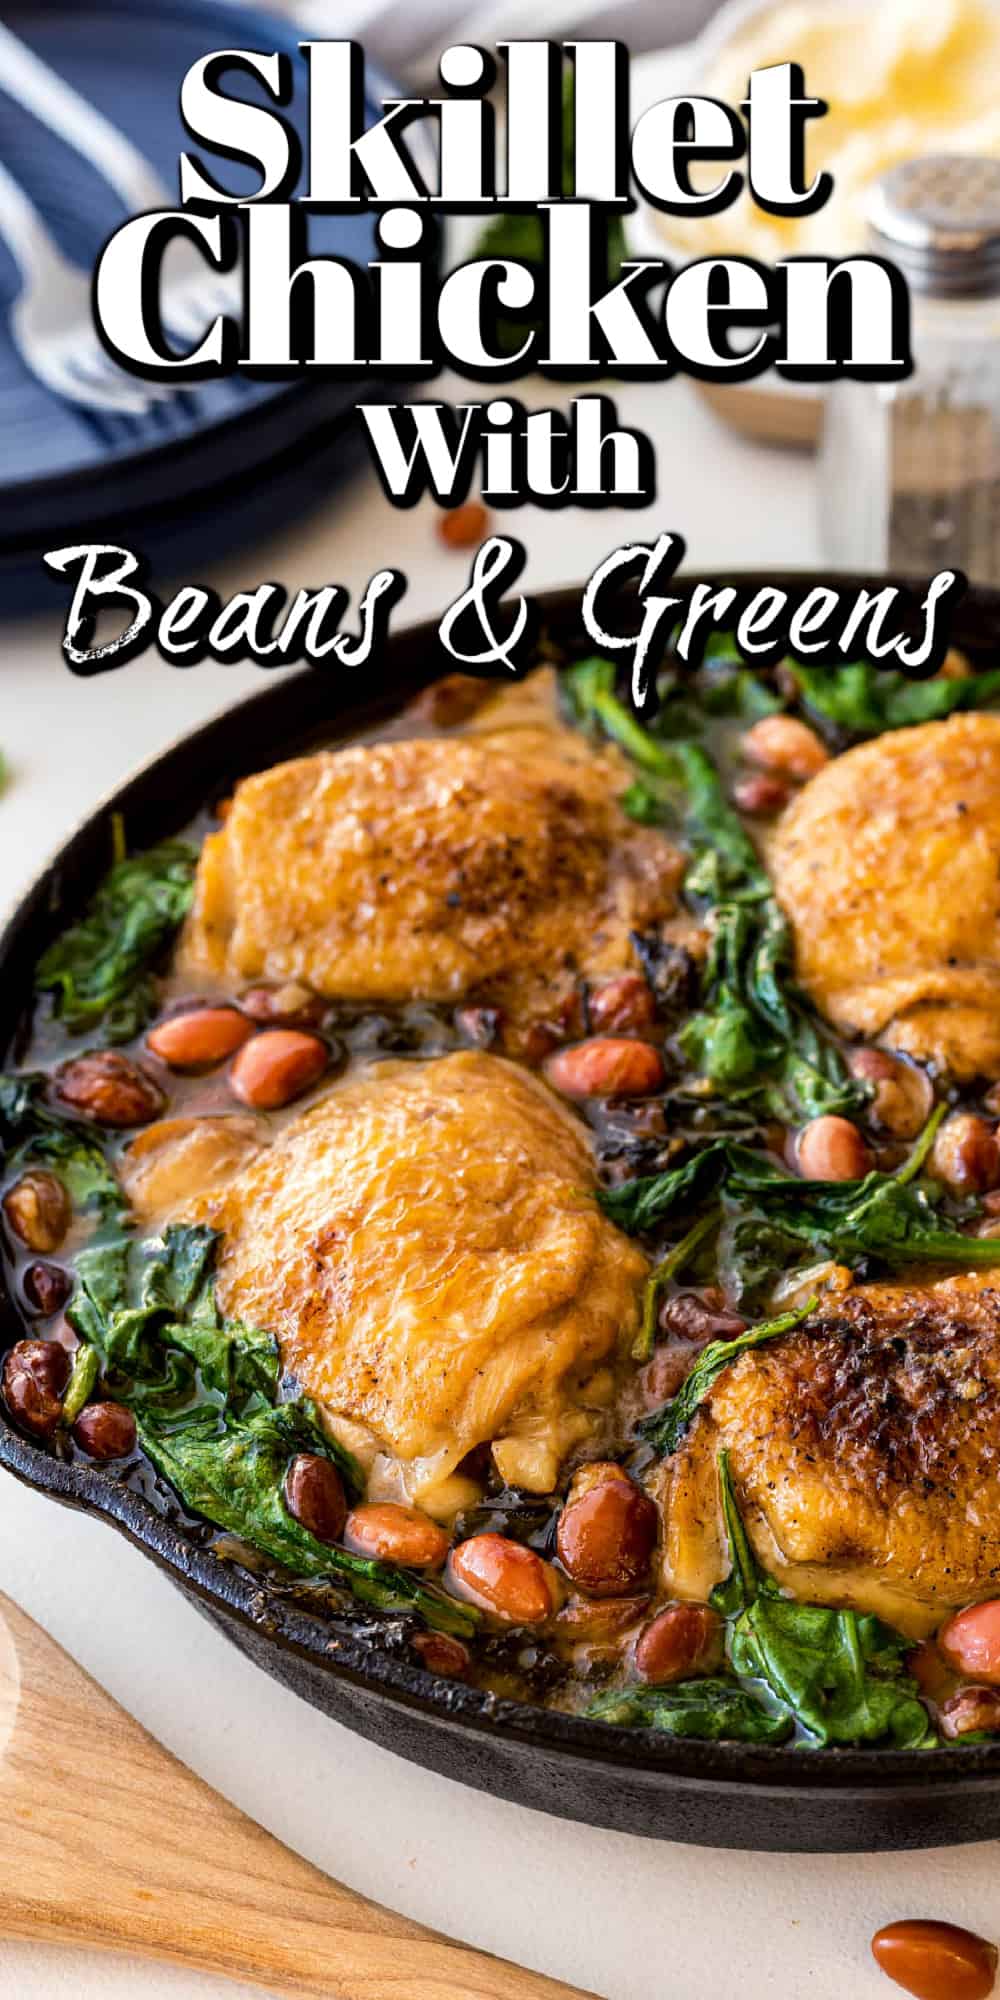 Skillet Chicken with Beans and Greens Pin.